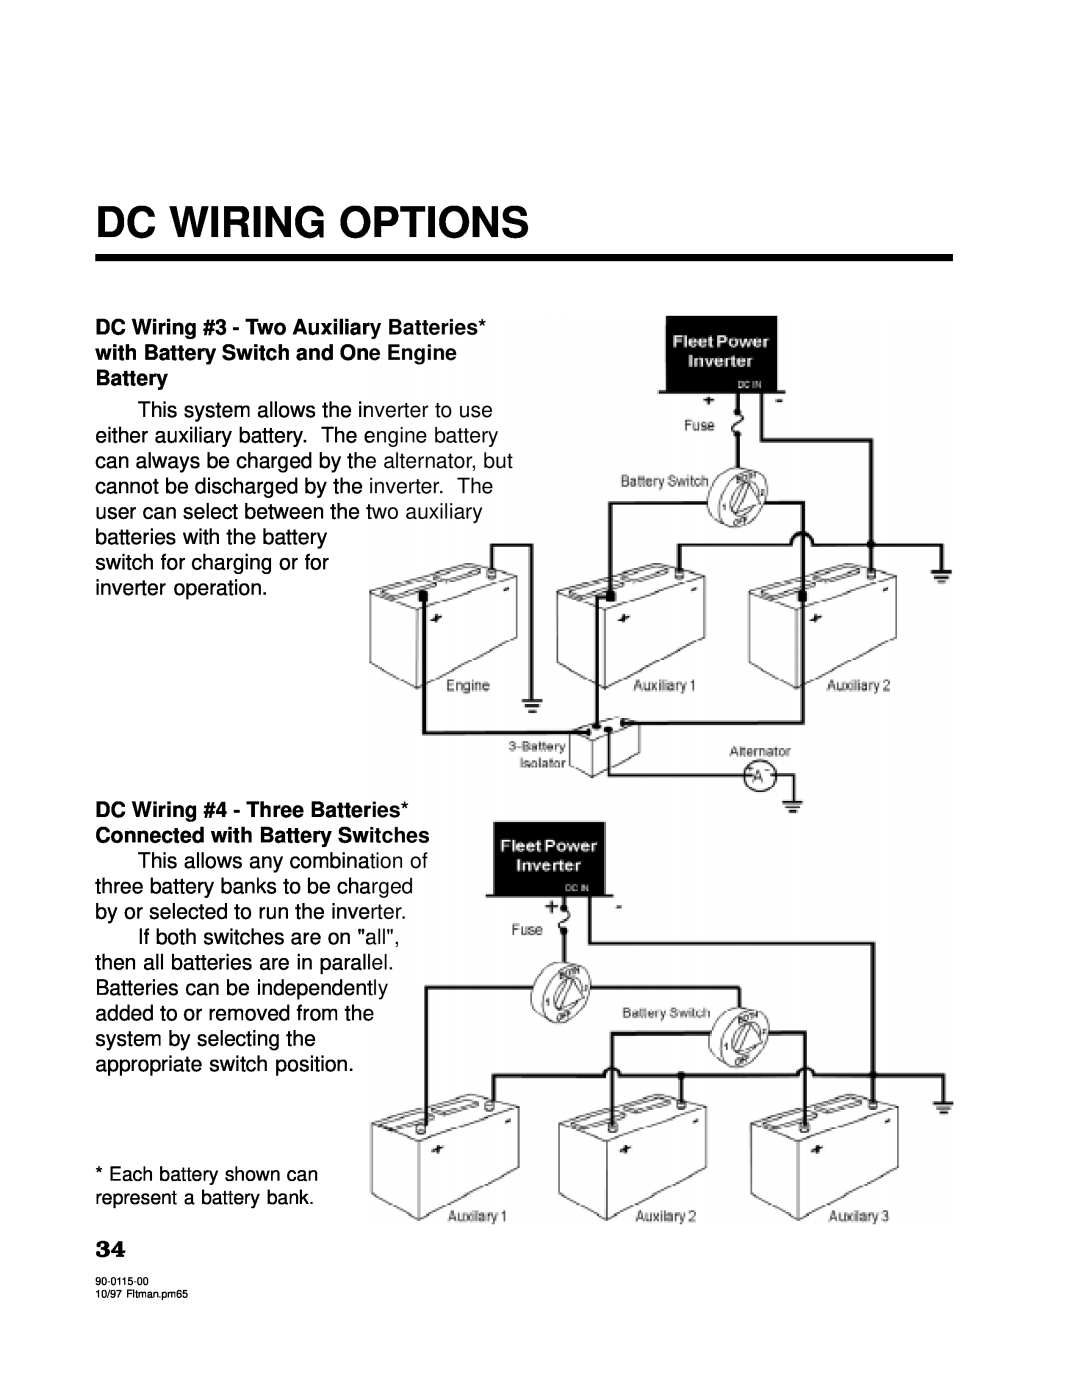 Xantrex Technology 2500, 2000 owner manual Dc Wiring Options, switch for charging or for inverter operation 